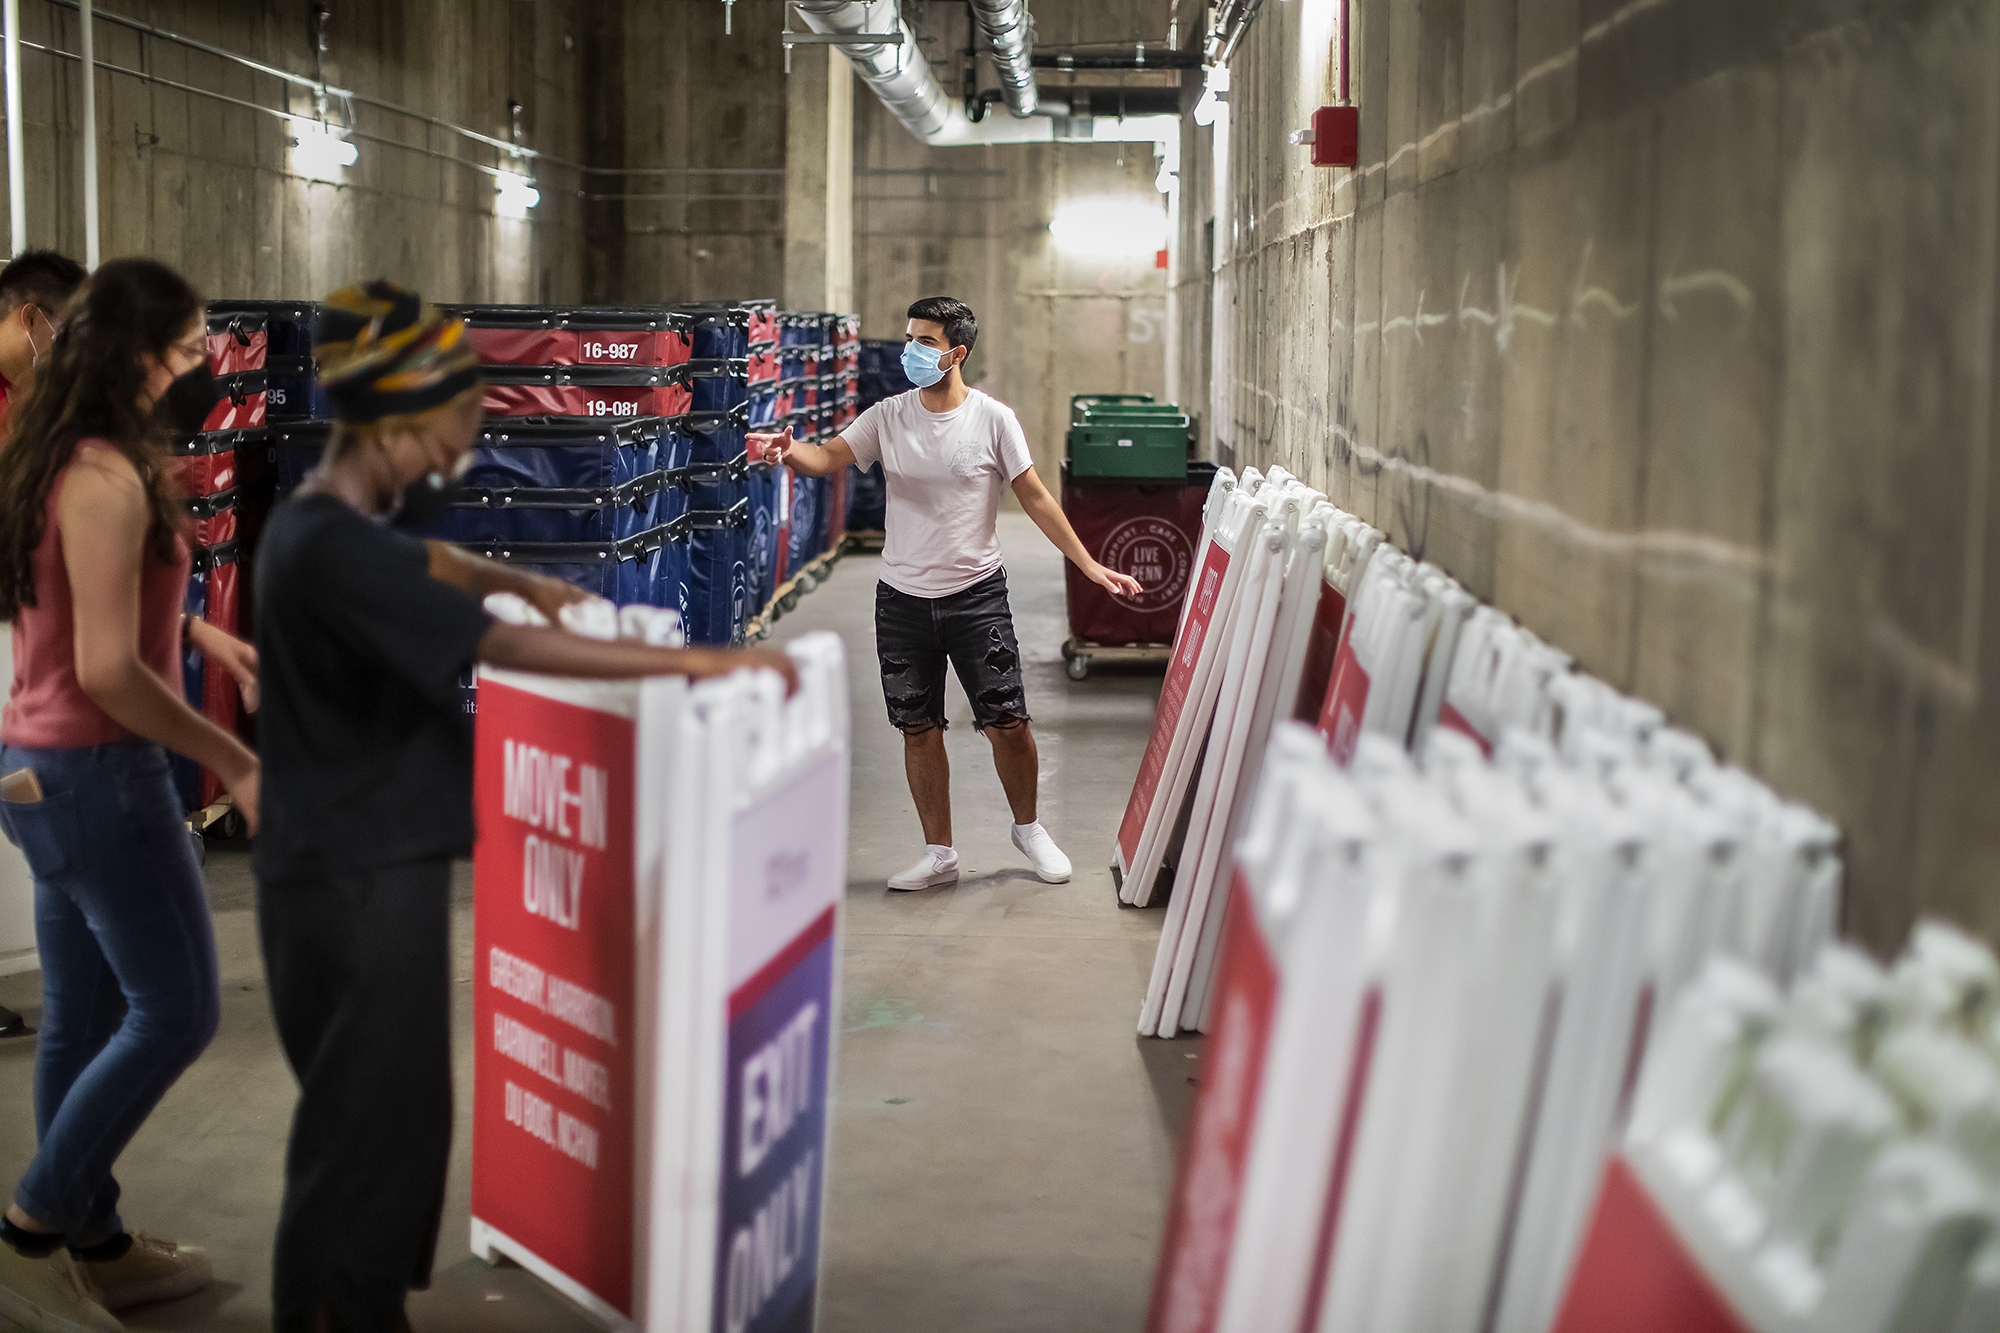 Student stands in basement filled with moving carts and signs